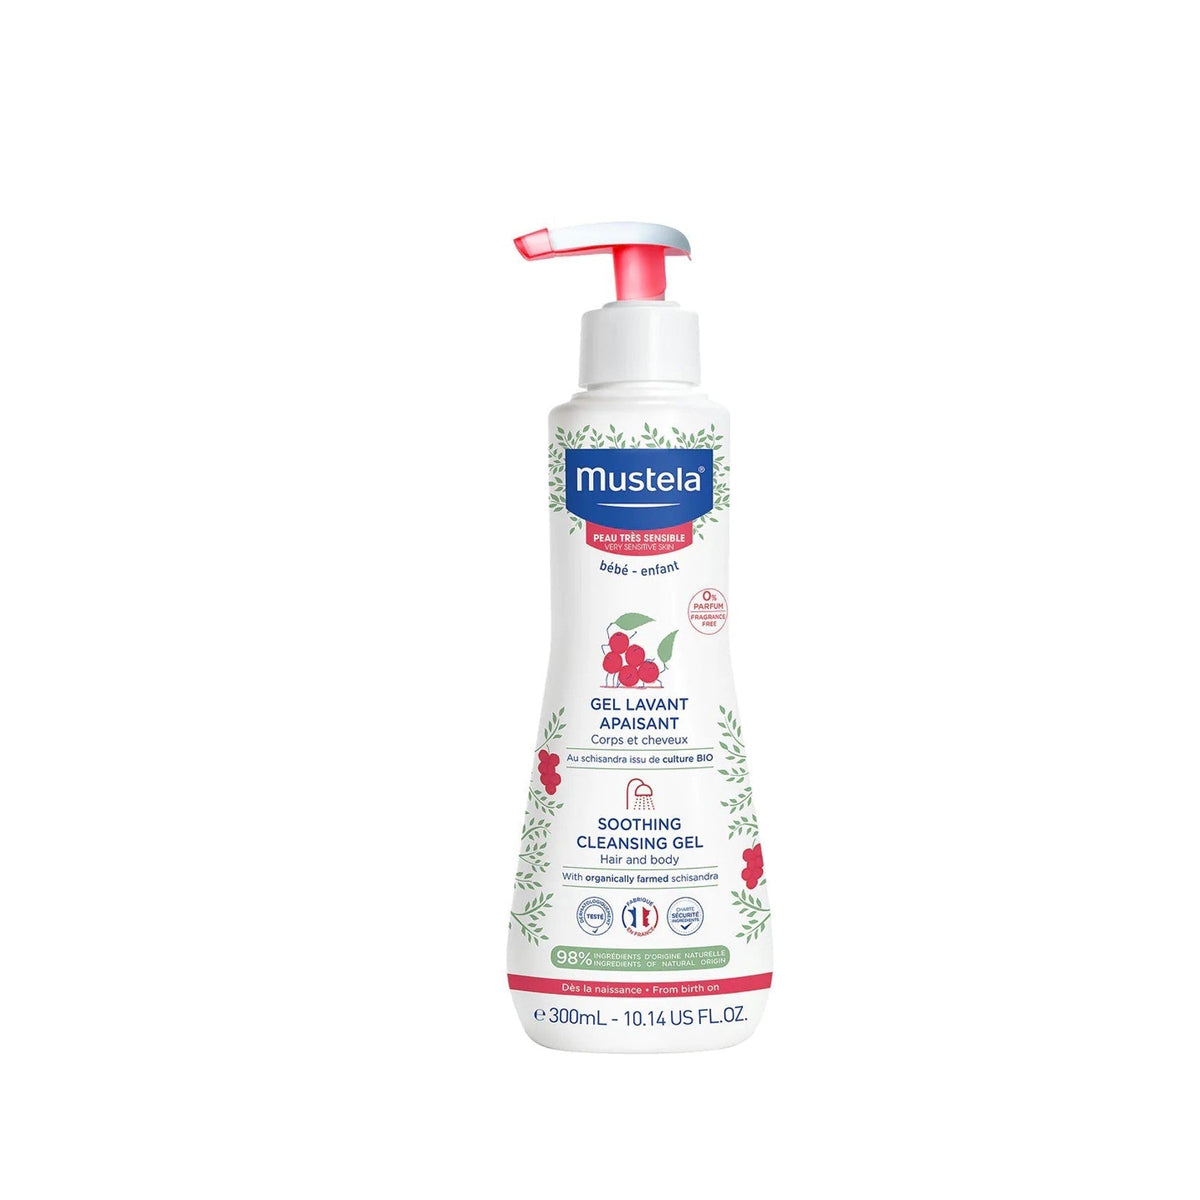 Mustela Soothing Cleansing Gel 300ml- Lillys Pharmacy and Health Store